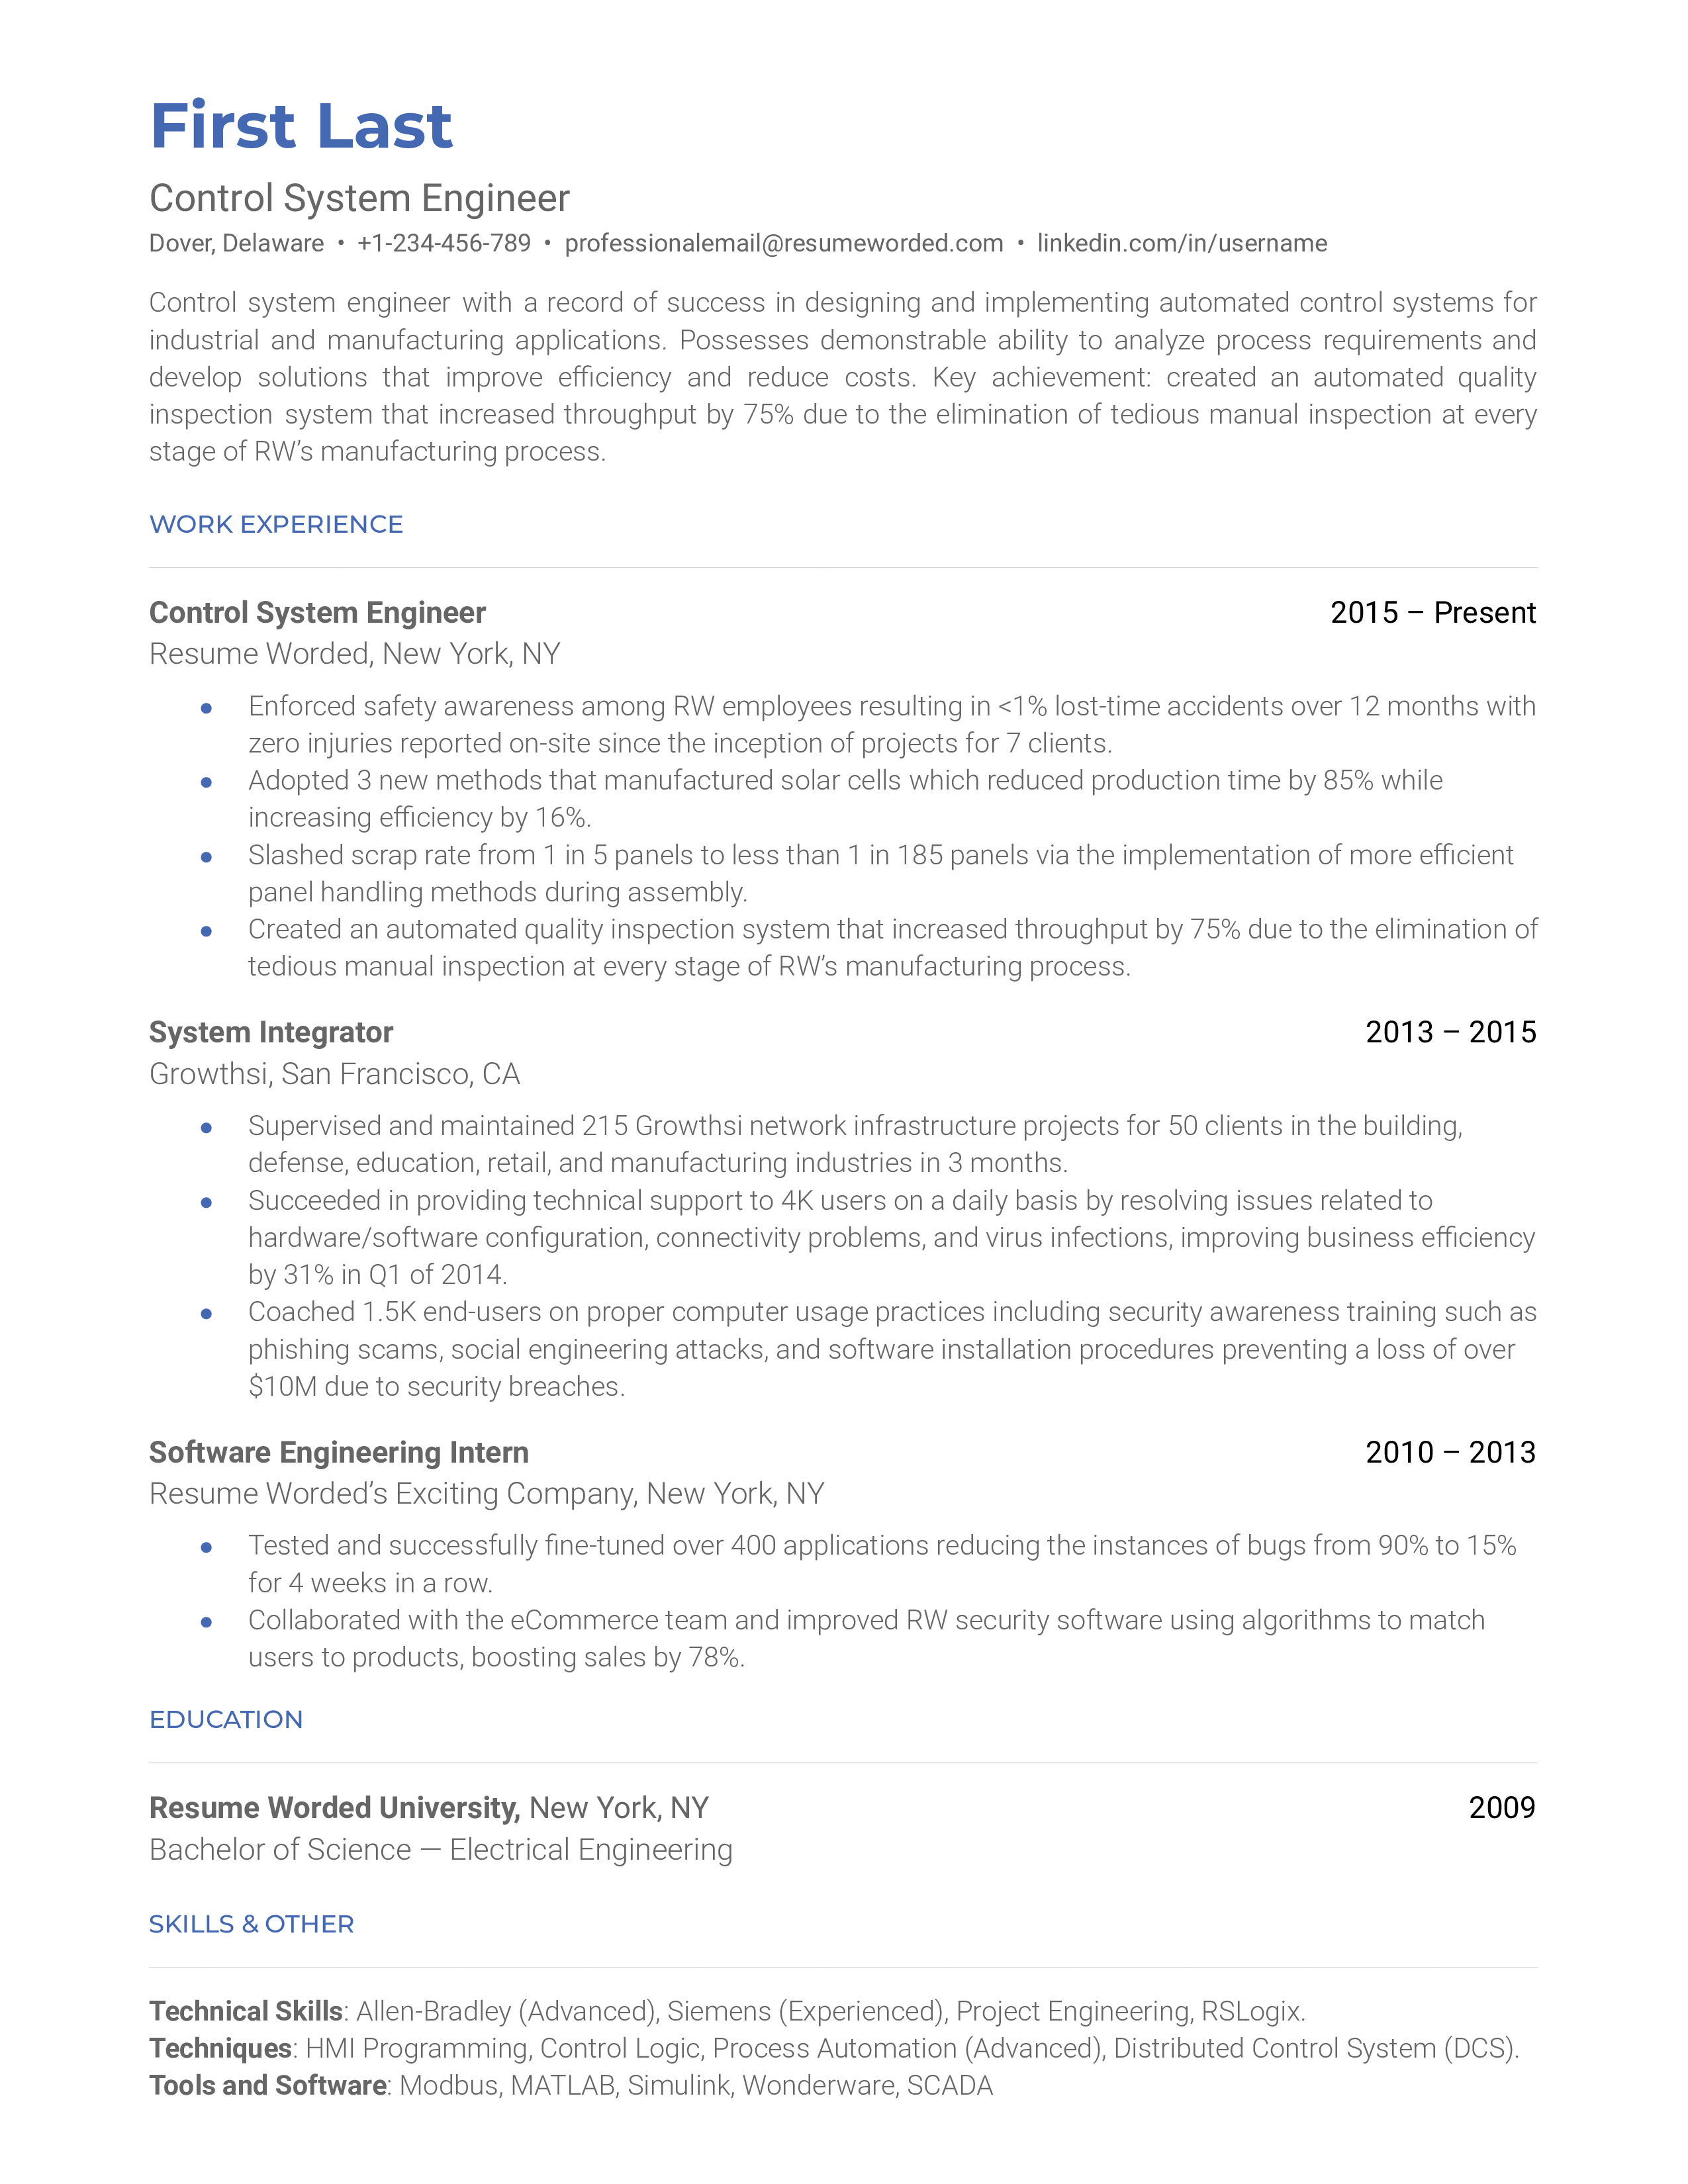 A Control System Engineer  resume template that highlights work experience and includes skills and education